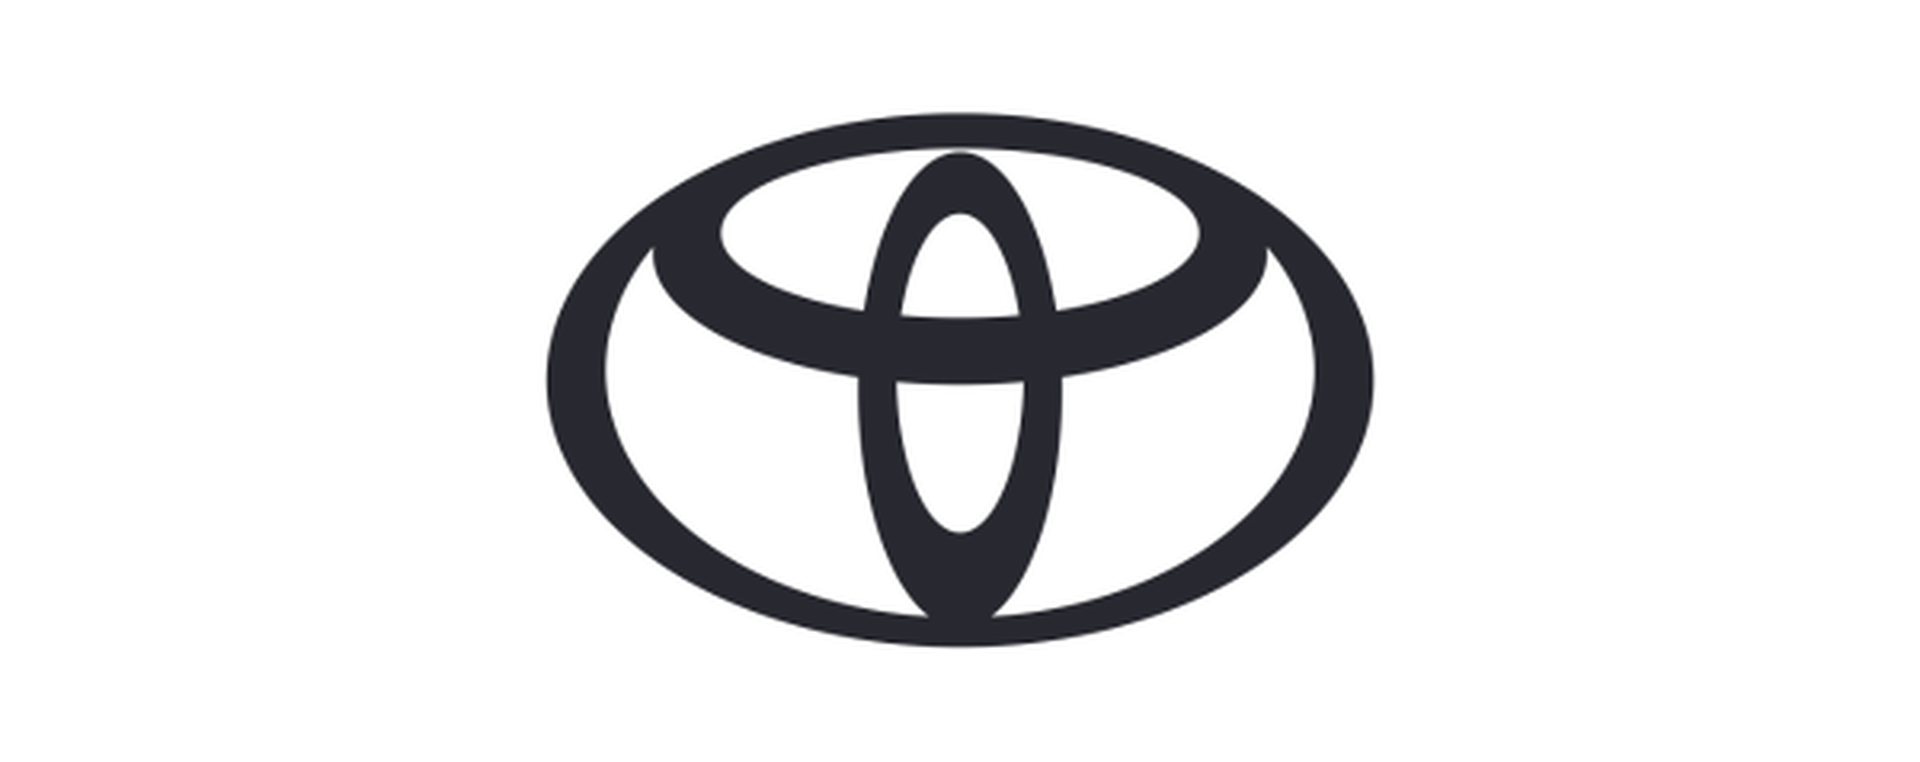 ToyotaAG_logo_grey.png